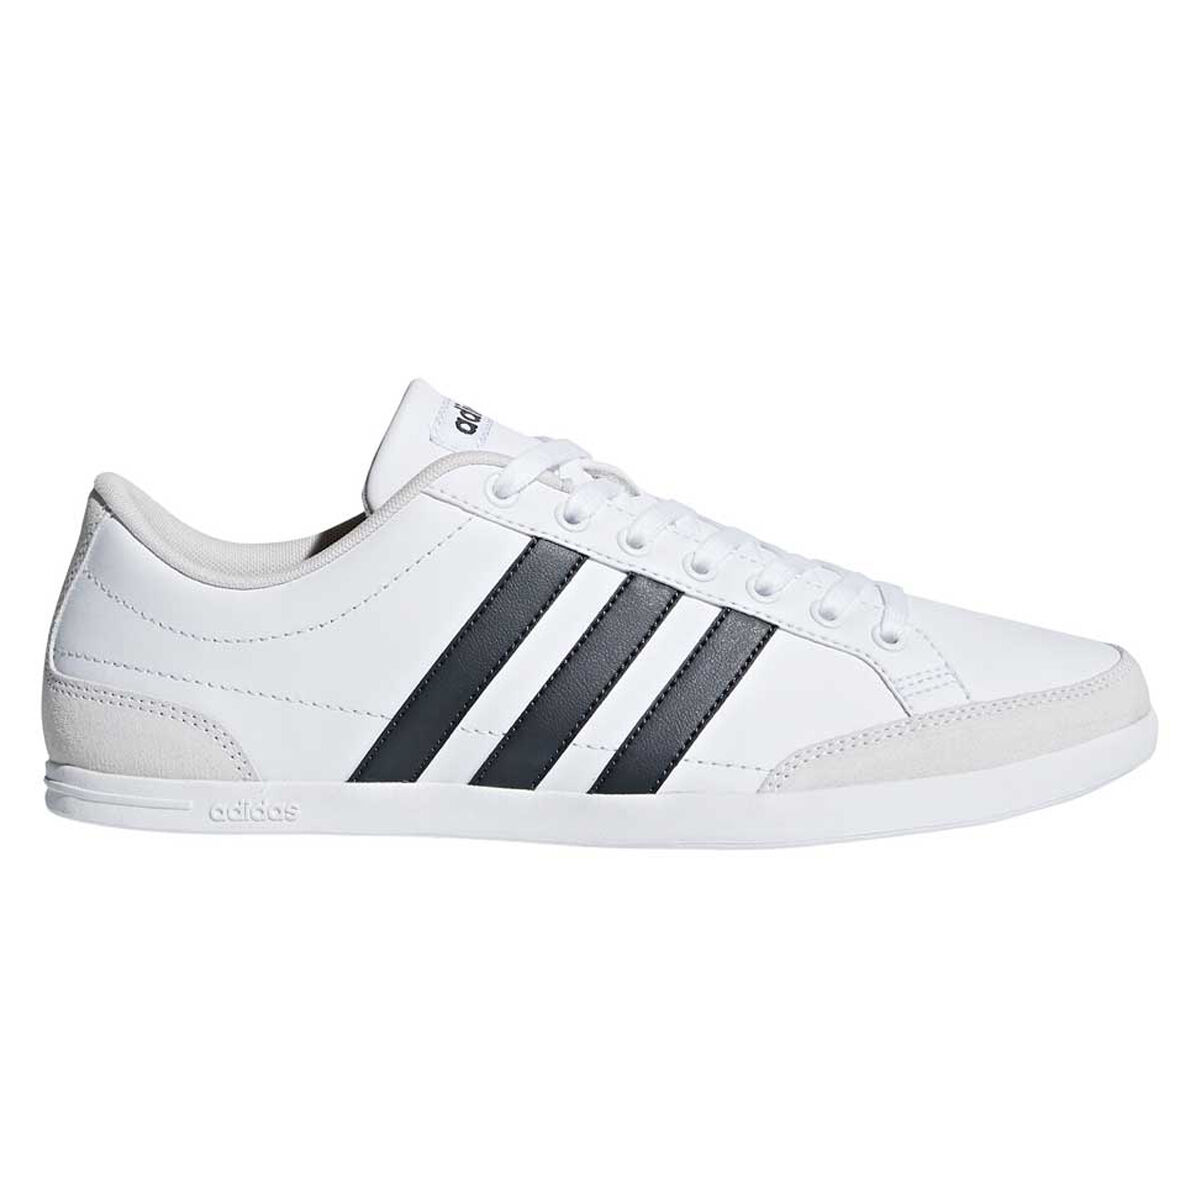 adidas caflaire shoes mens